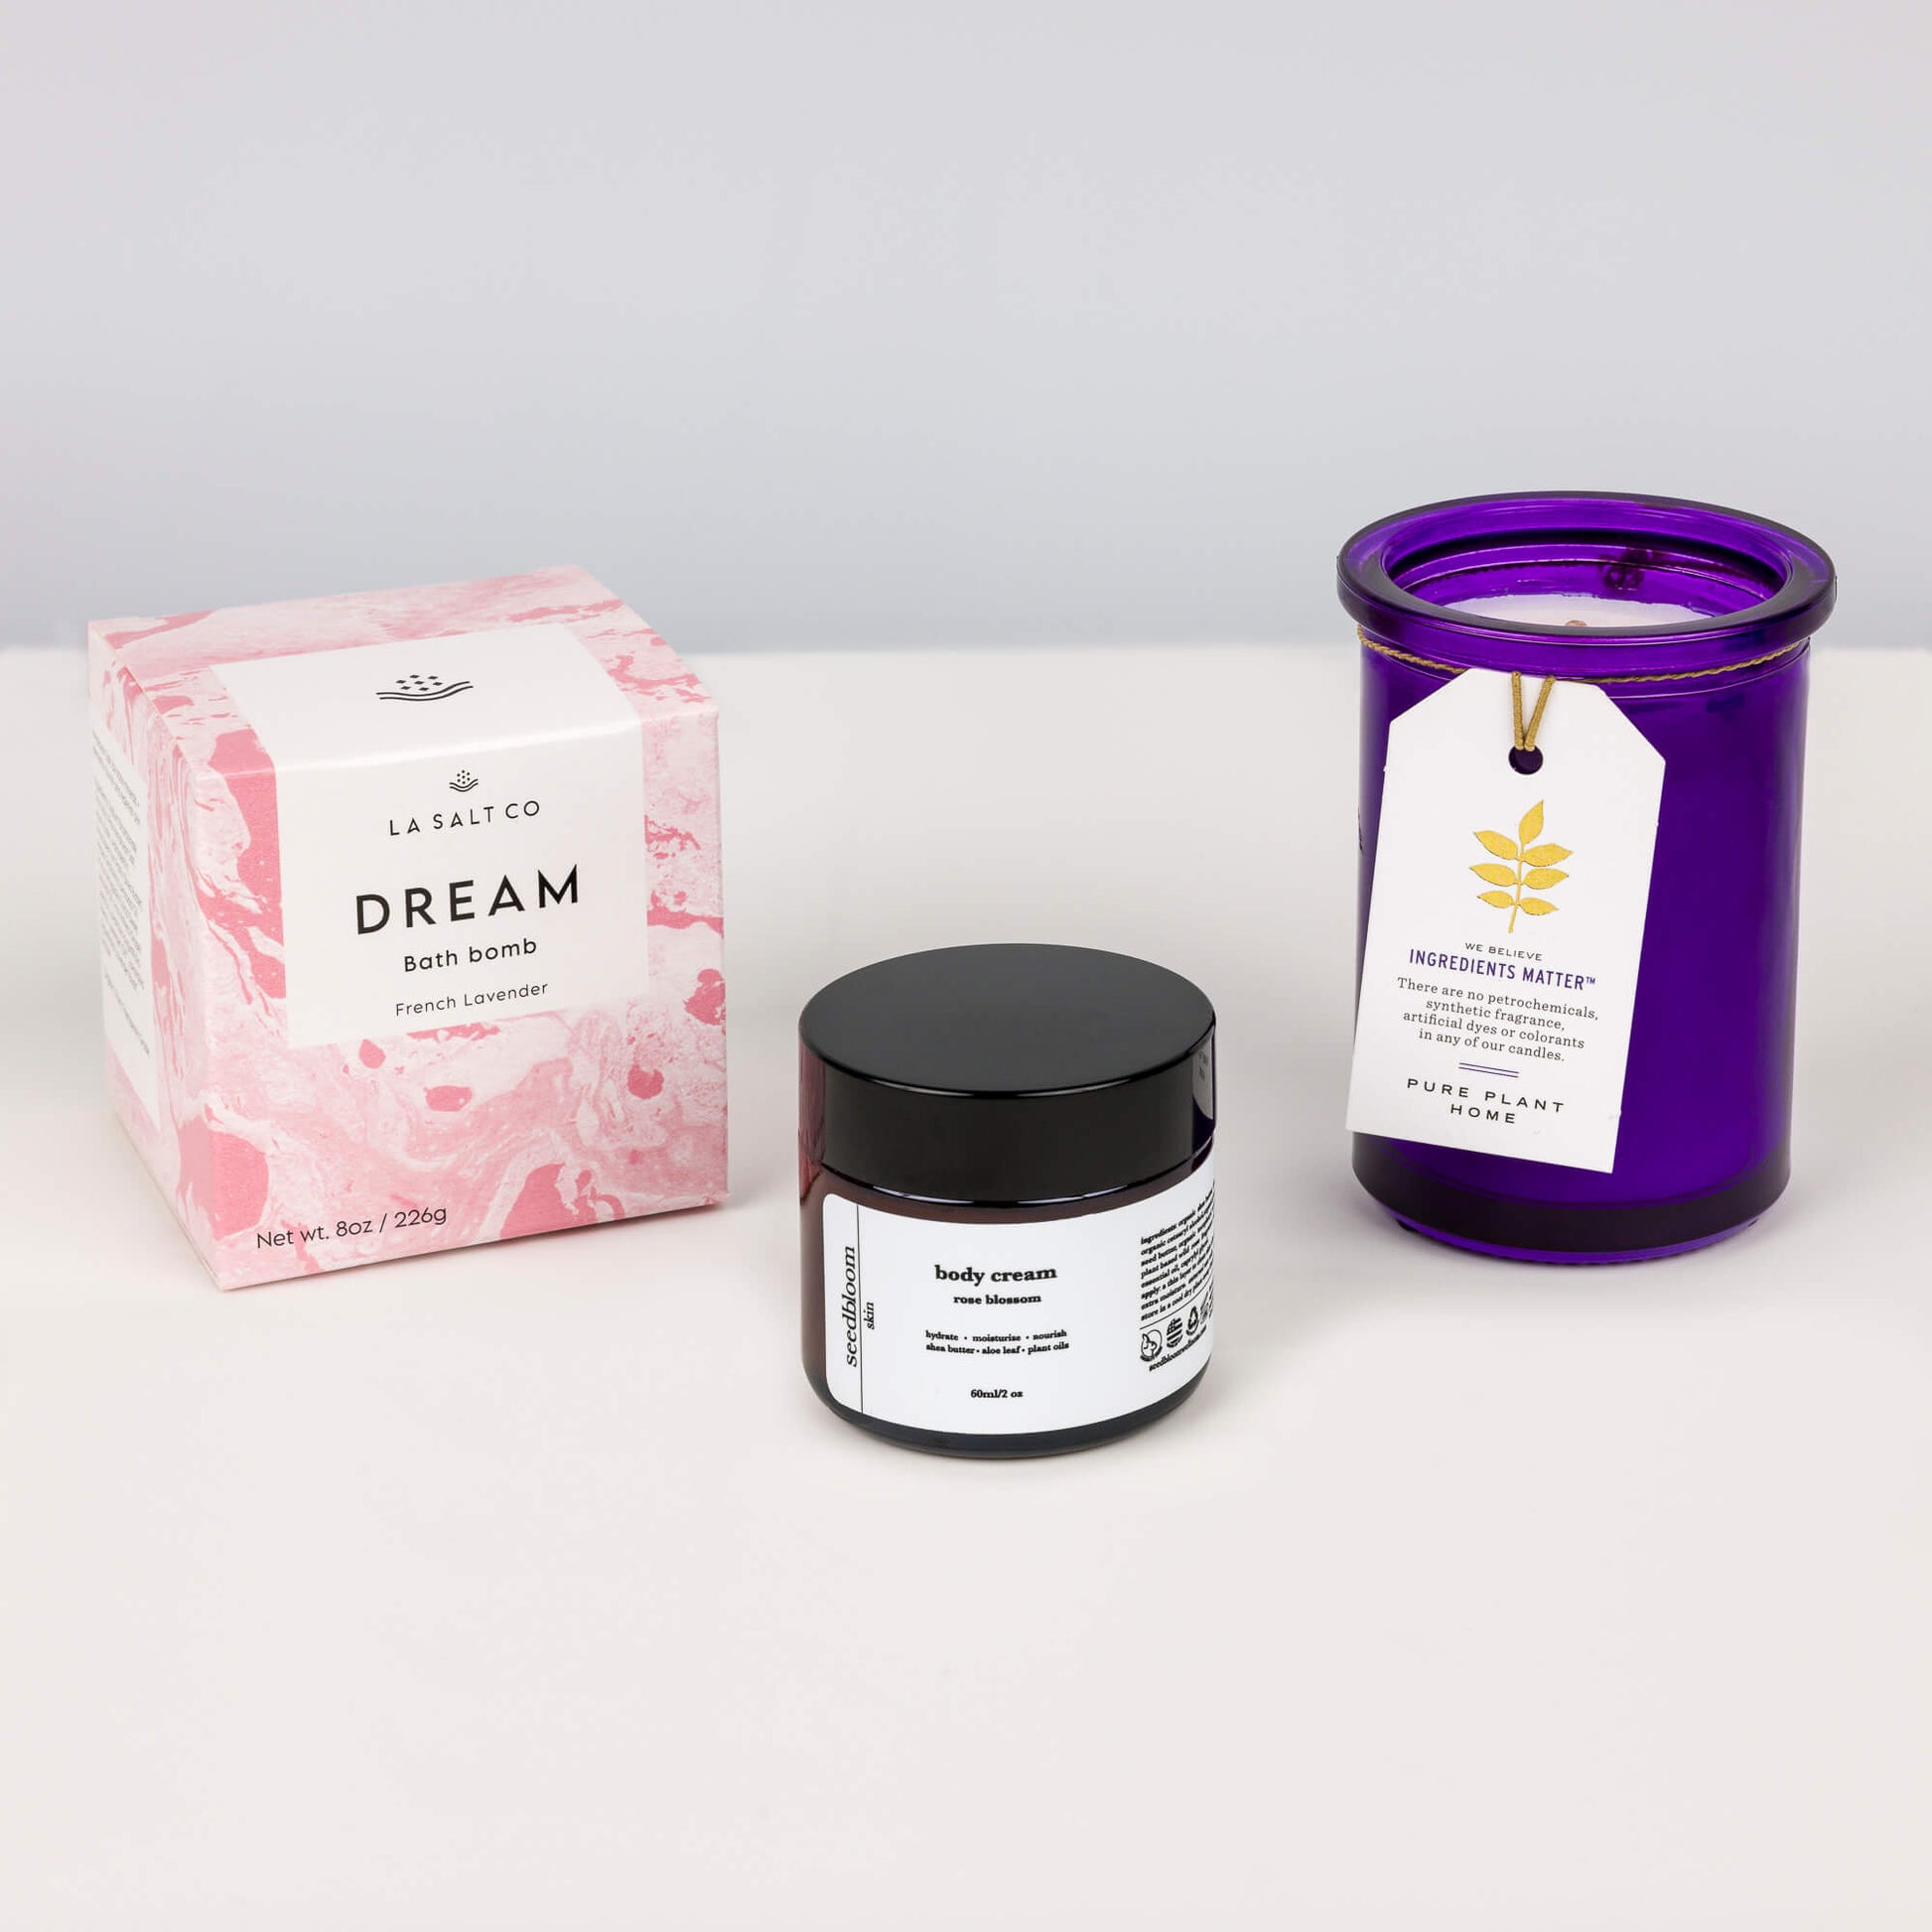 Lavender Dreams Bath Box, a curated collection of a bath bomb, aromatherapy candle, and rosehip moisturizer